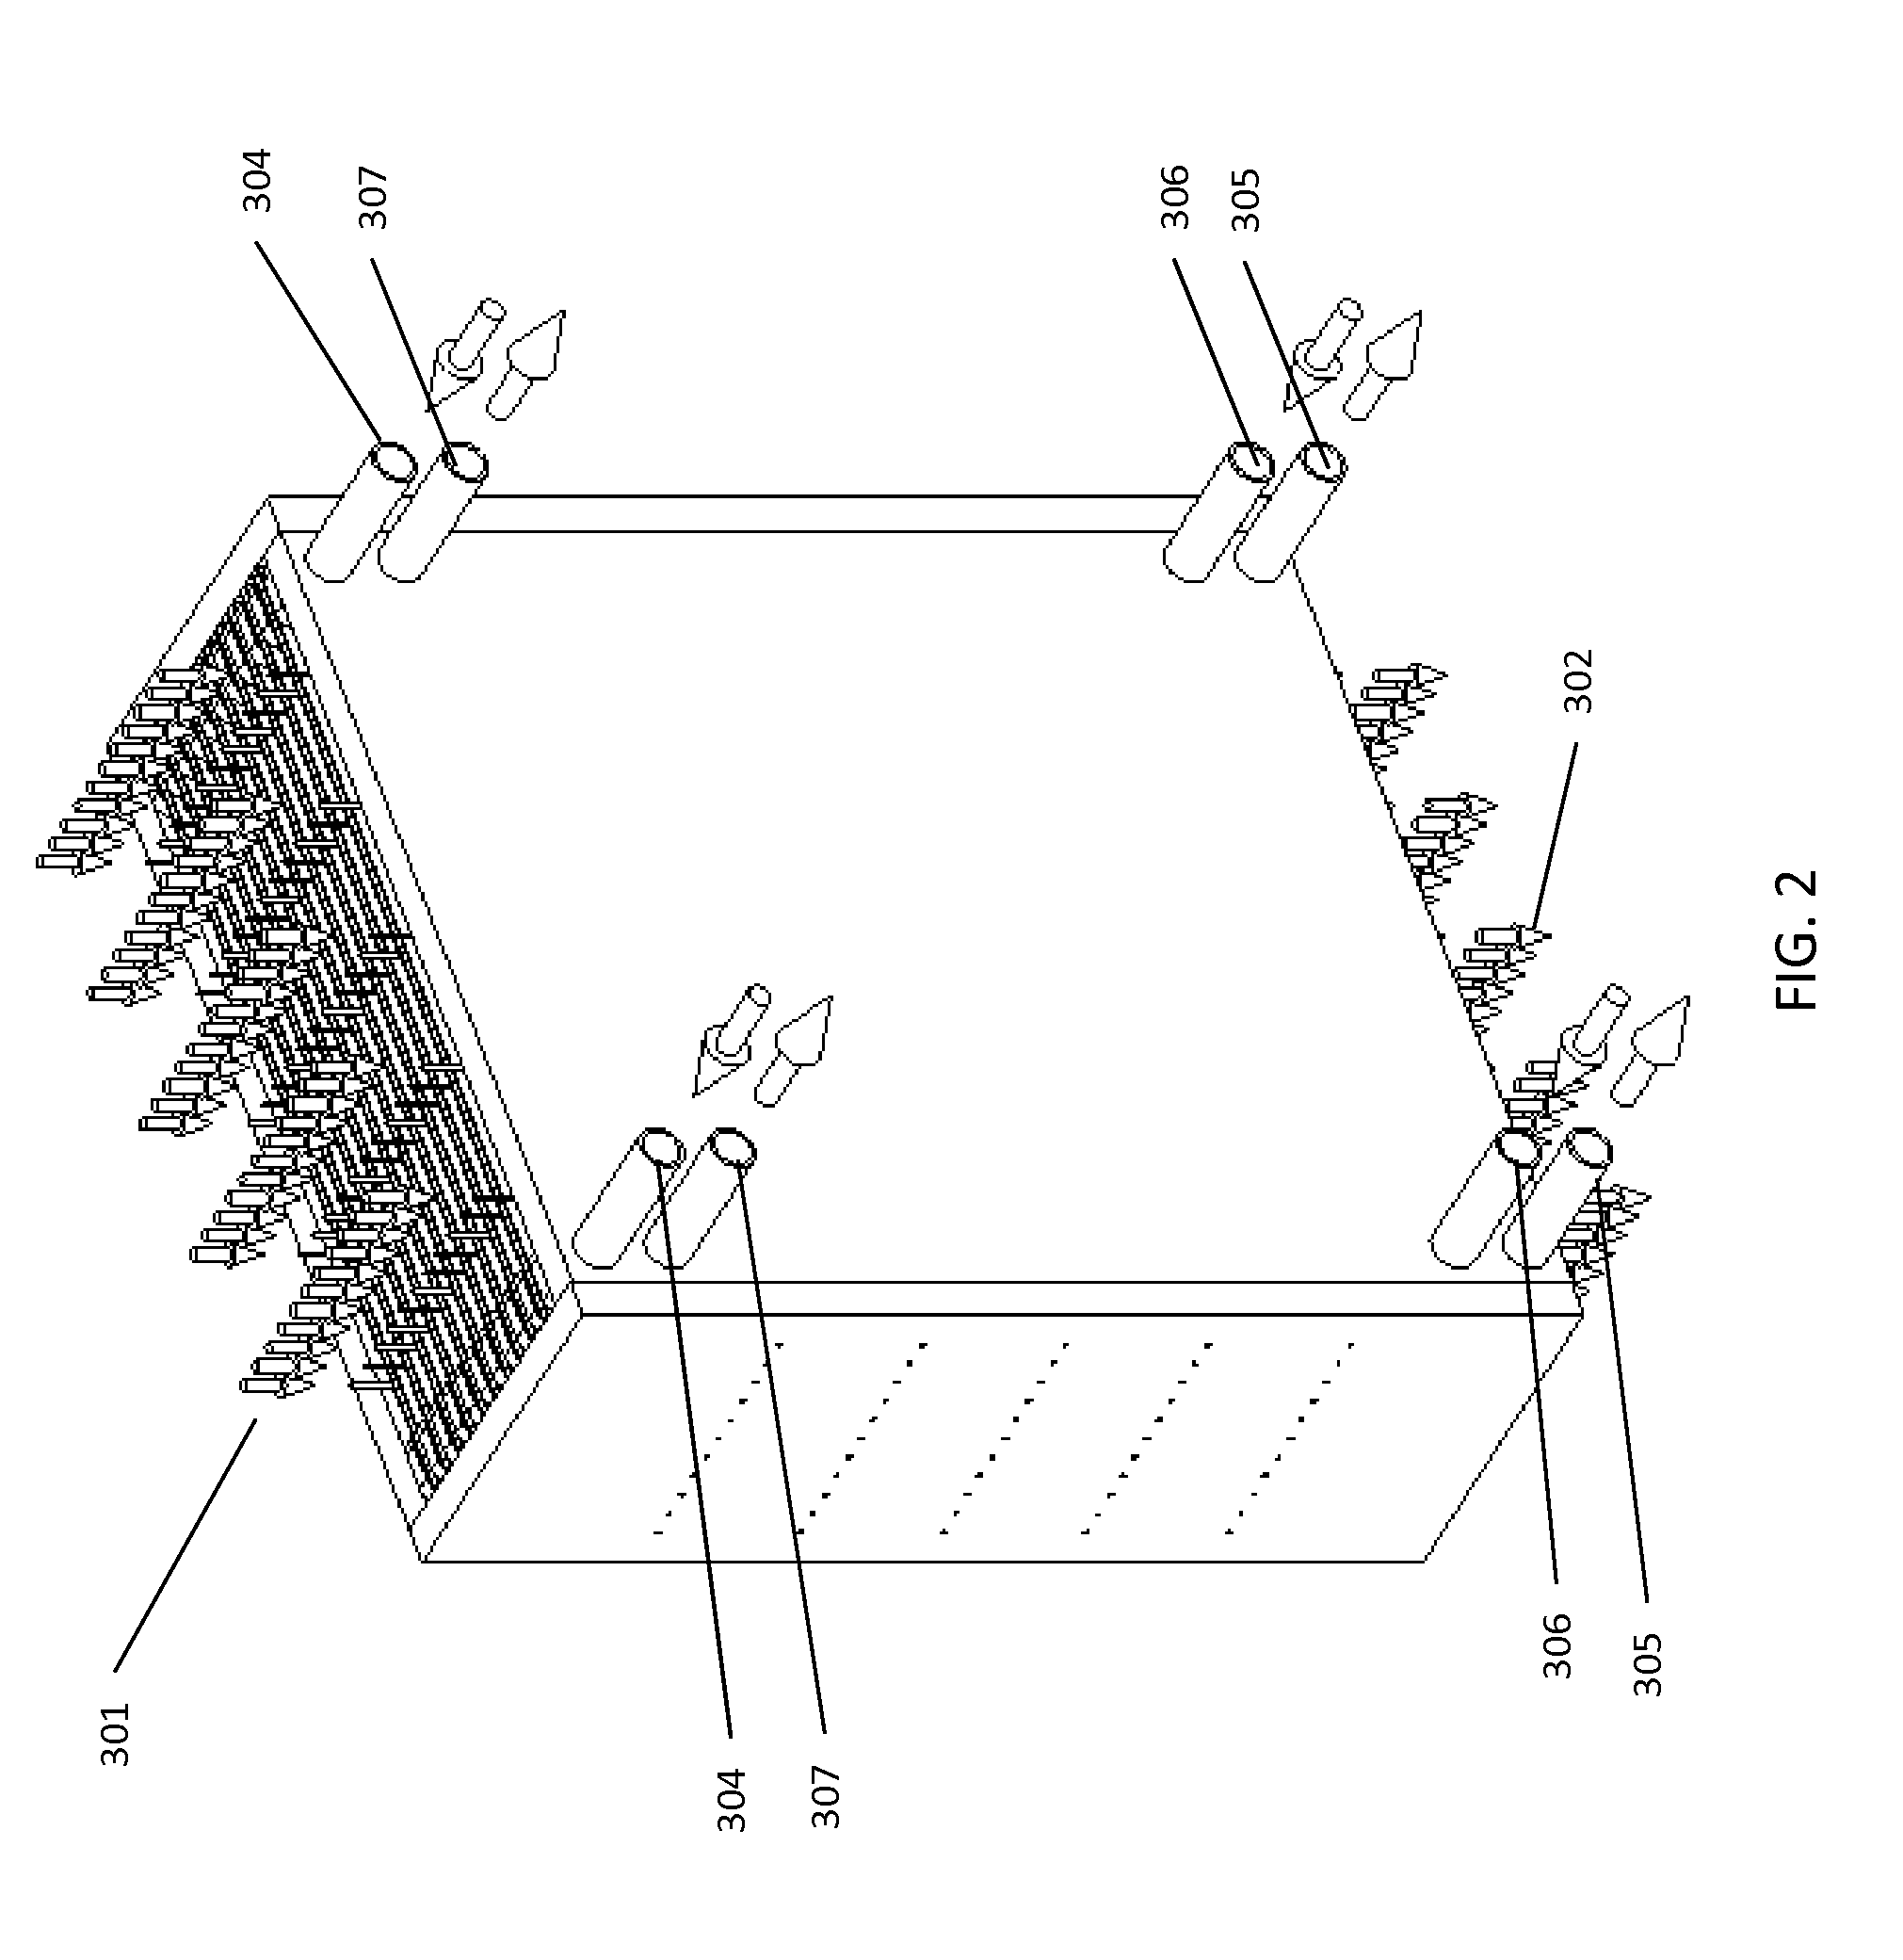 Methods and systems for cooling buildings with large heat loads using desiccant chillers